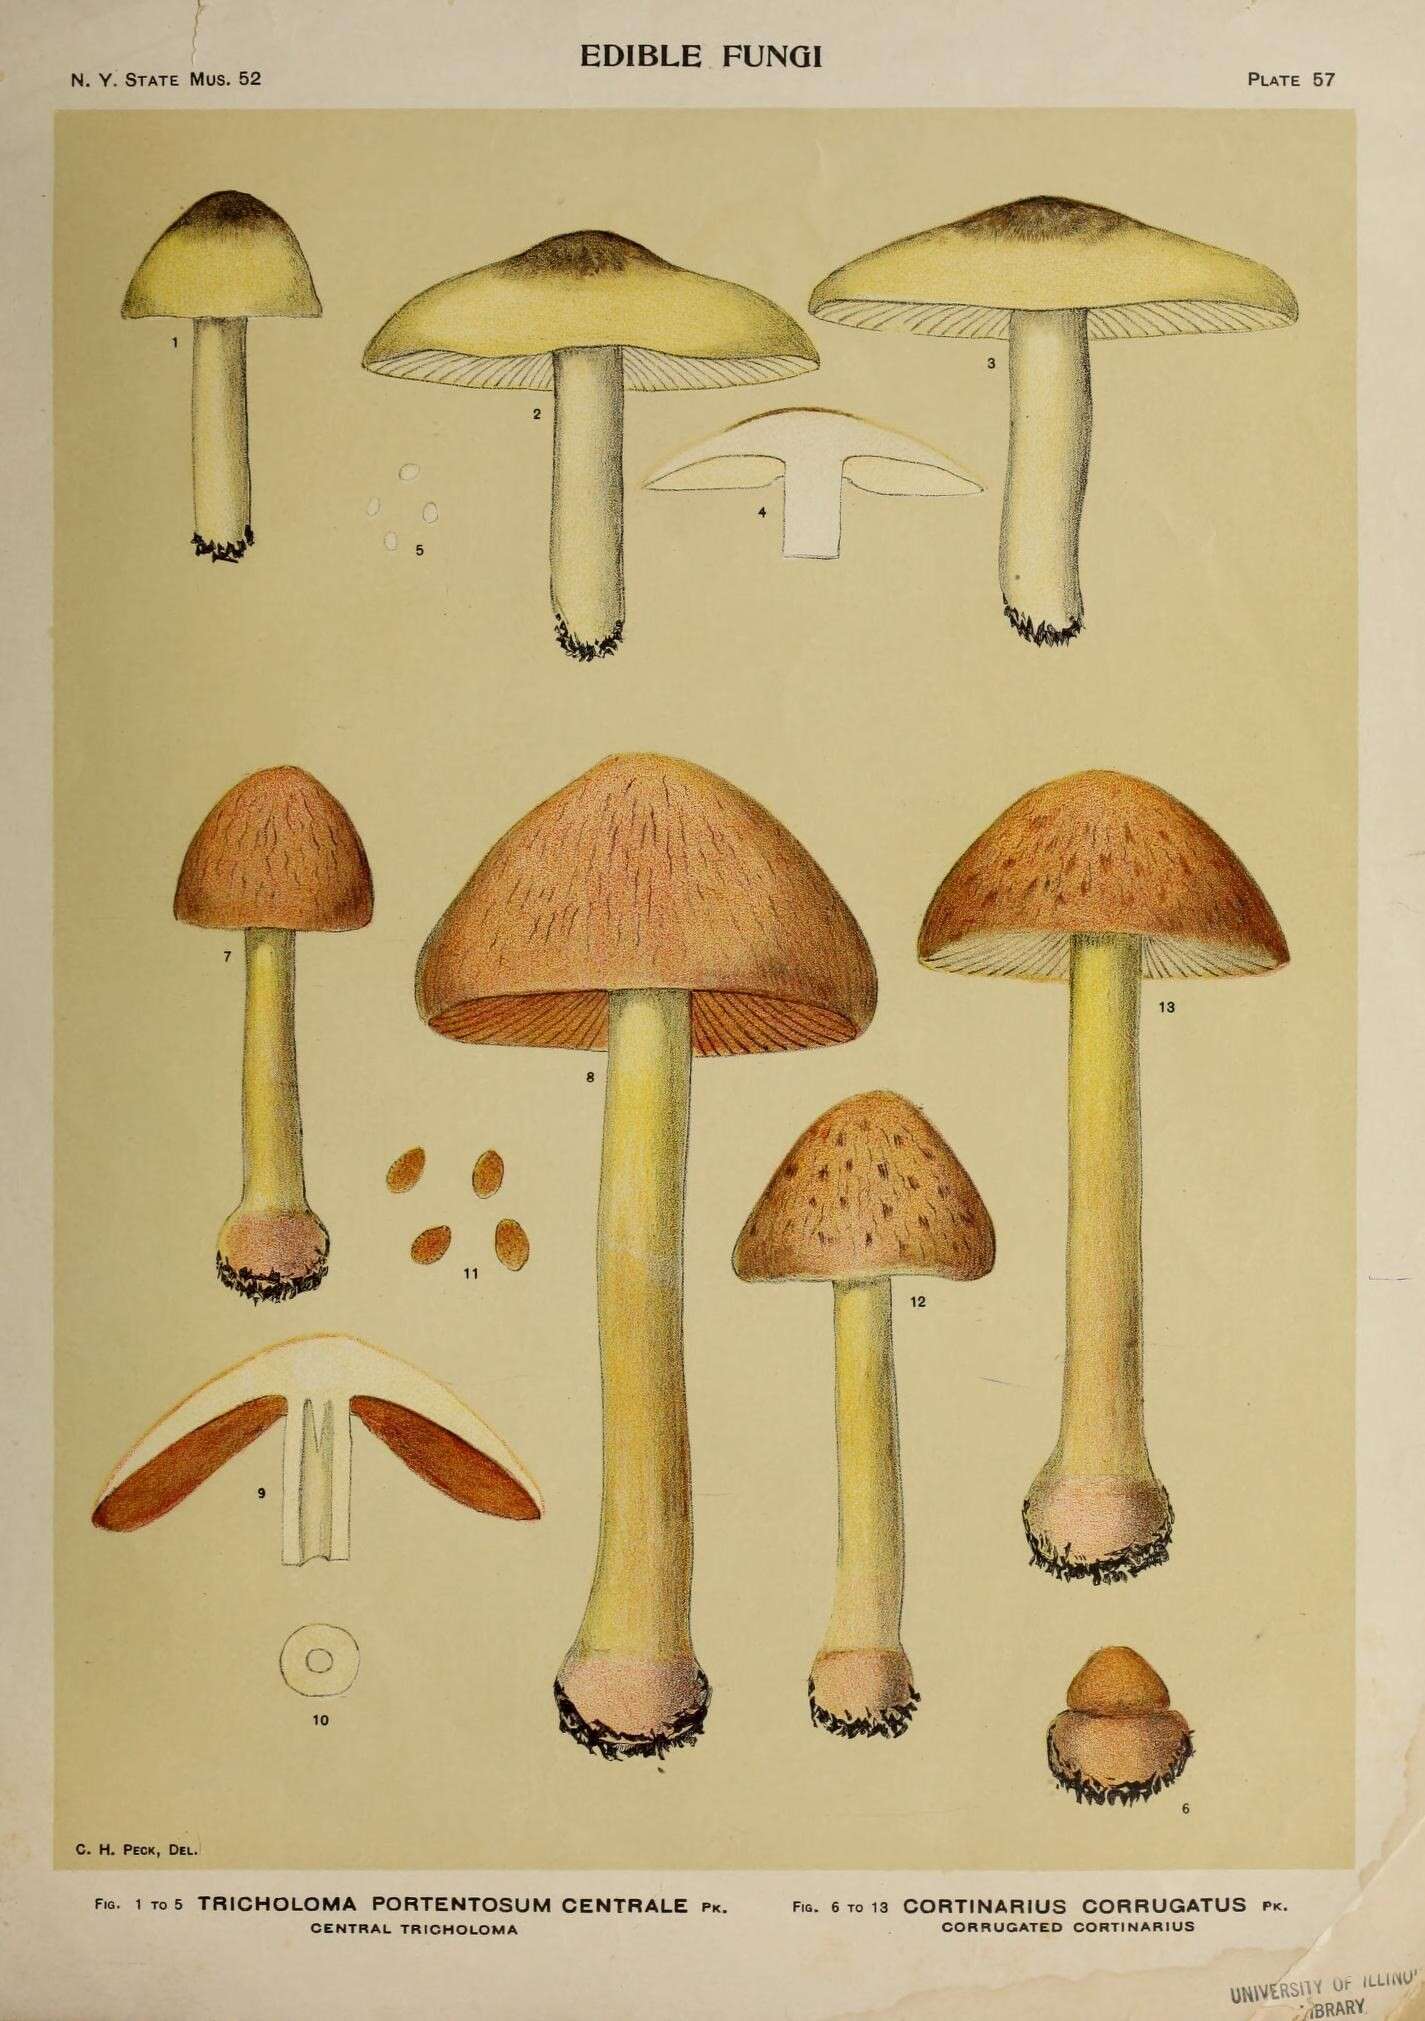 Image of Central tricholoma